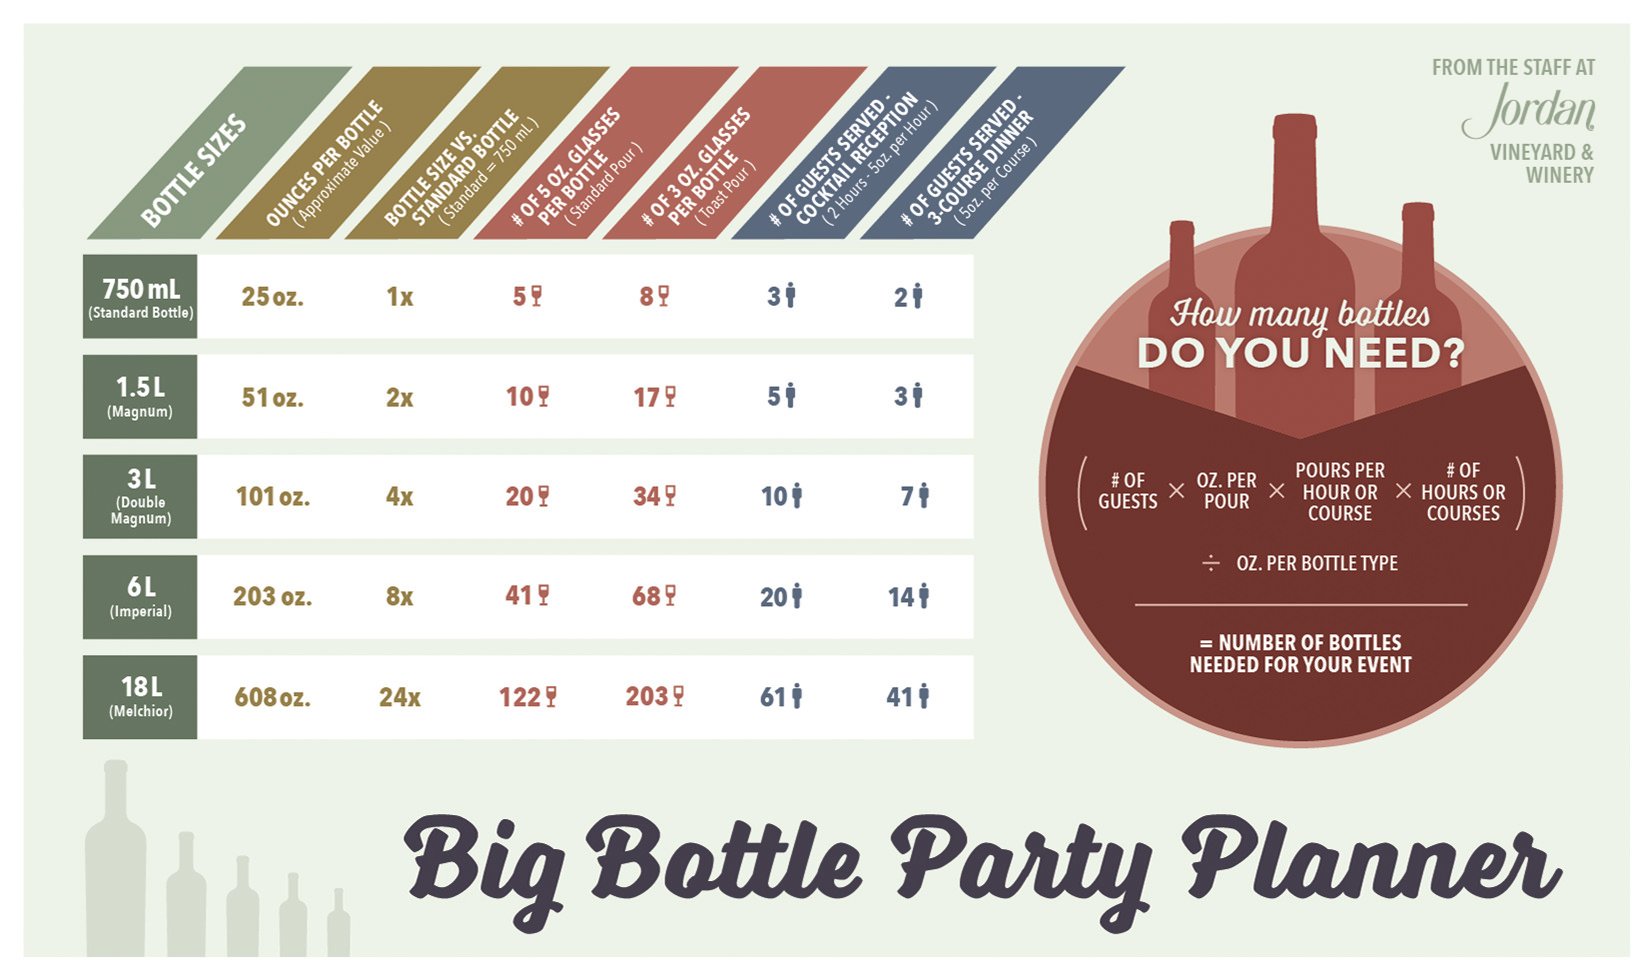 How To Guide for Serving Big Bottles of Wine